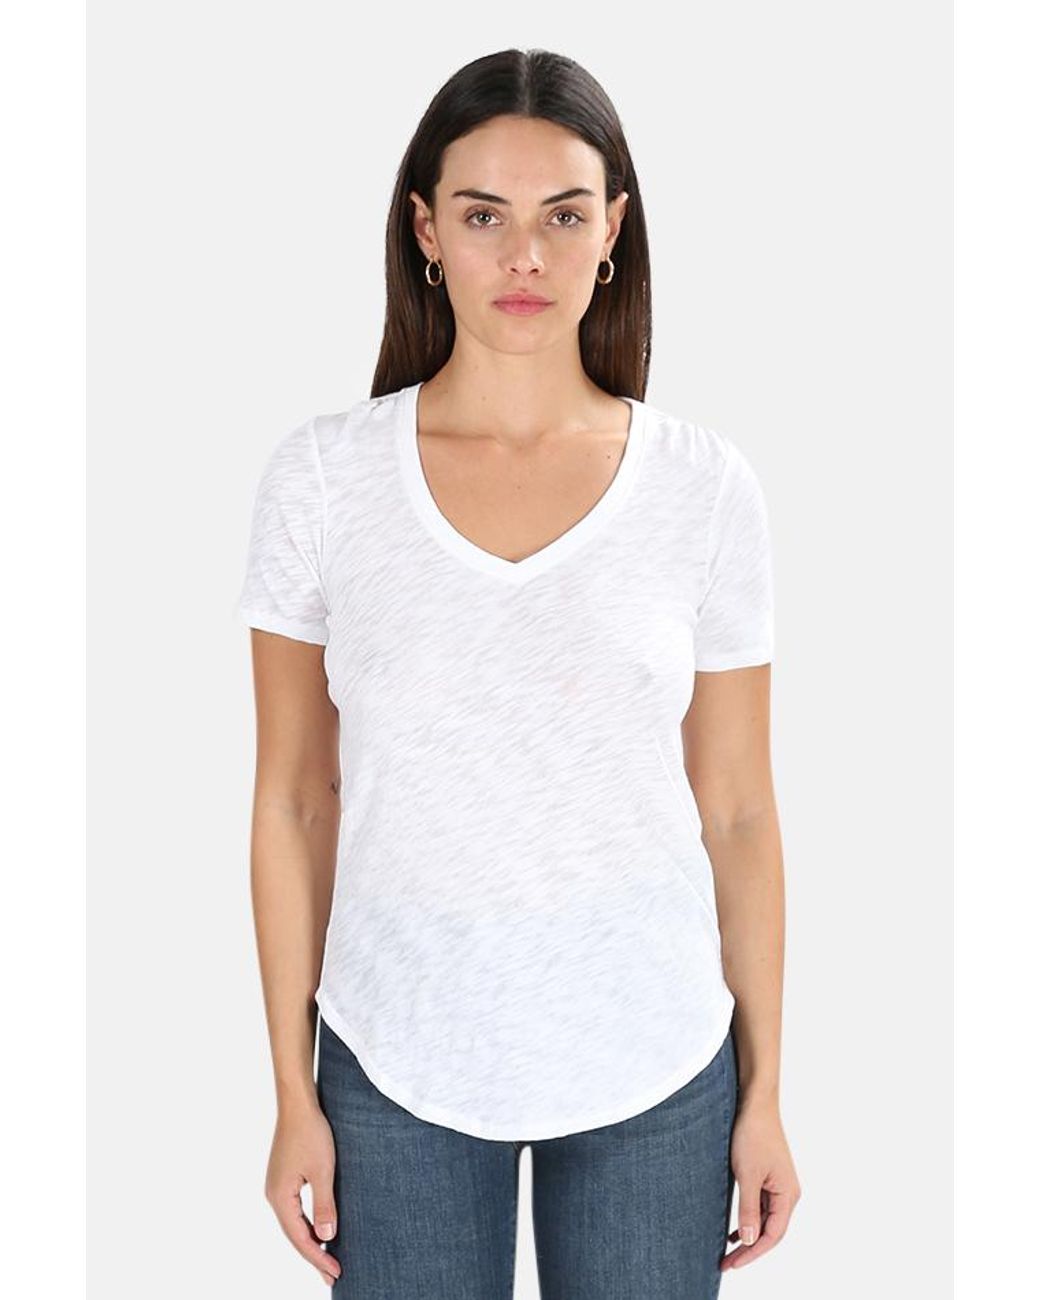 ATM Cotton V Neck Classic T-shirt in White - Lyst